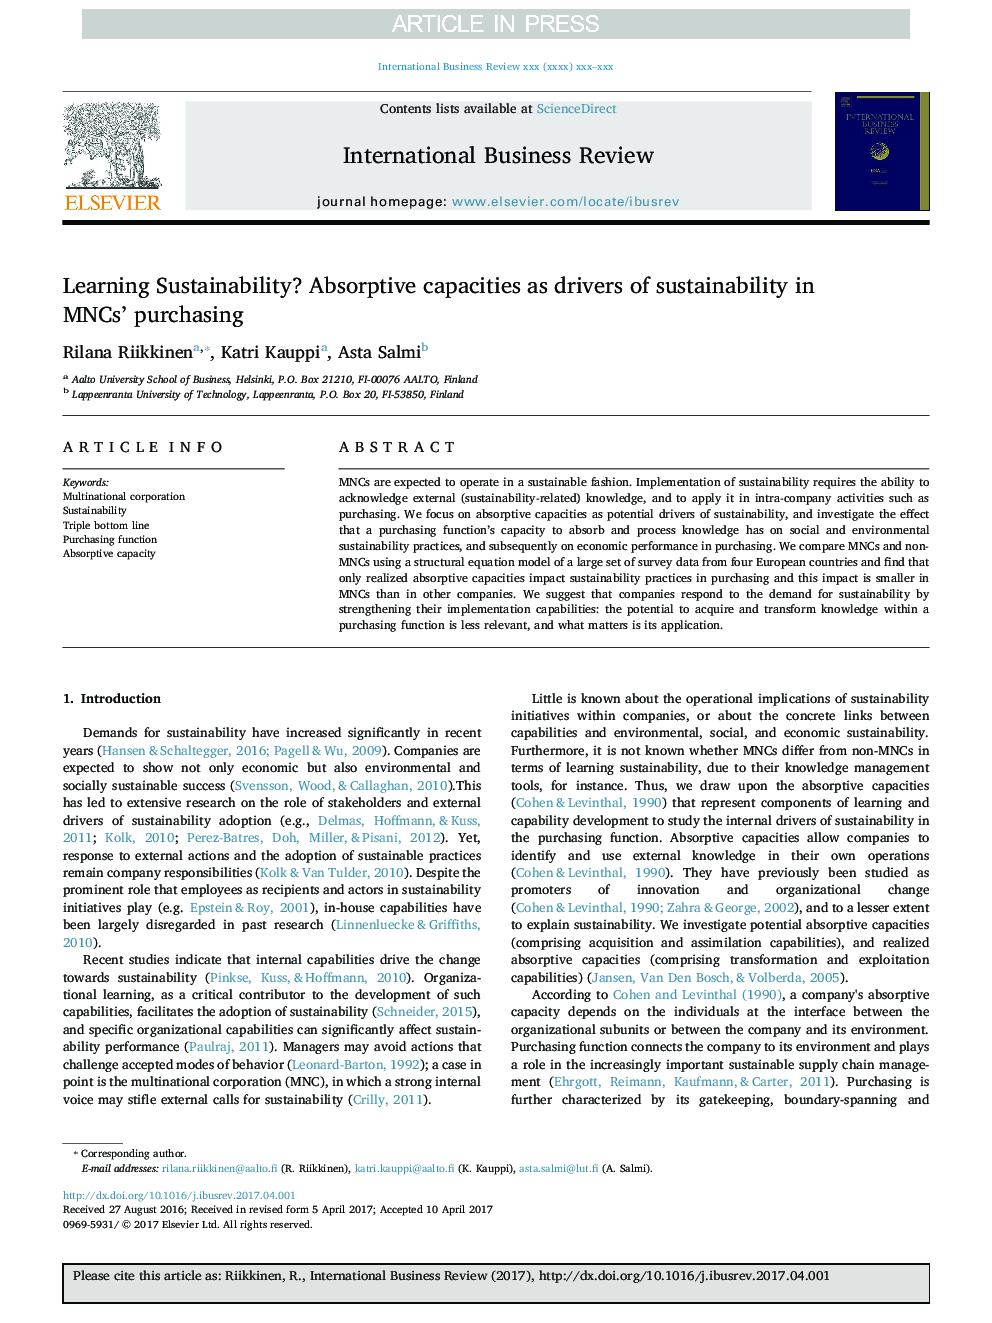 Learning Sustainability? Absorptive capacities as drivers of sustainability in MNCs' purchasing